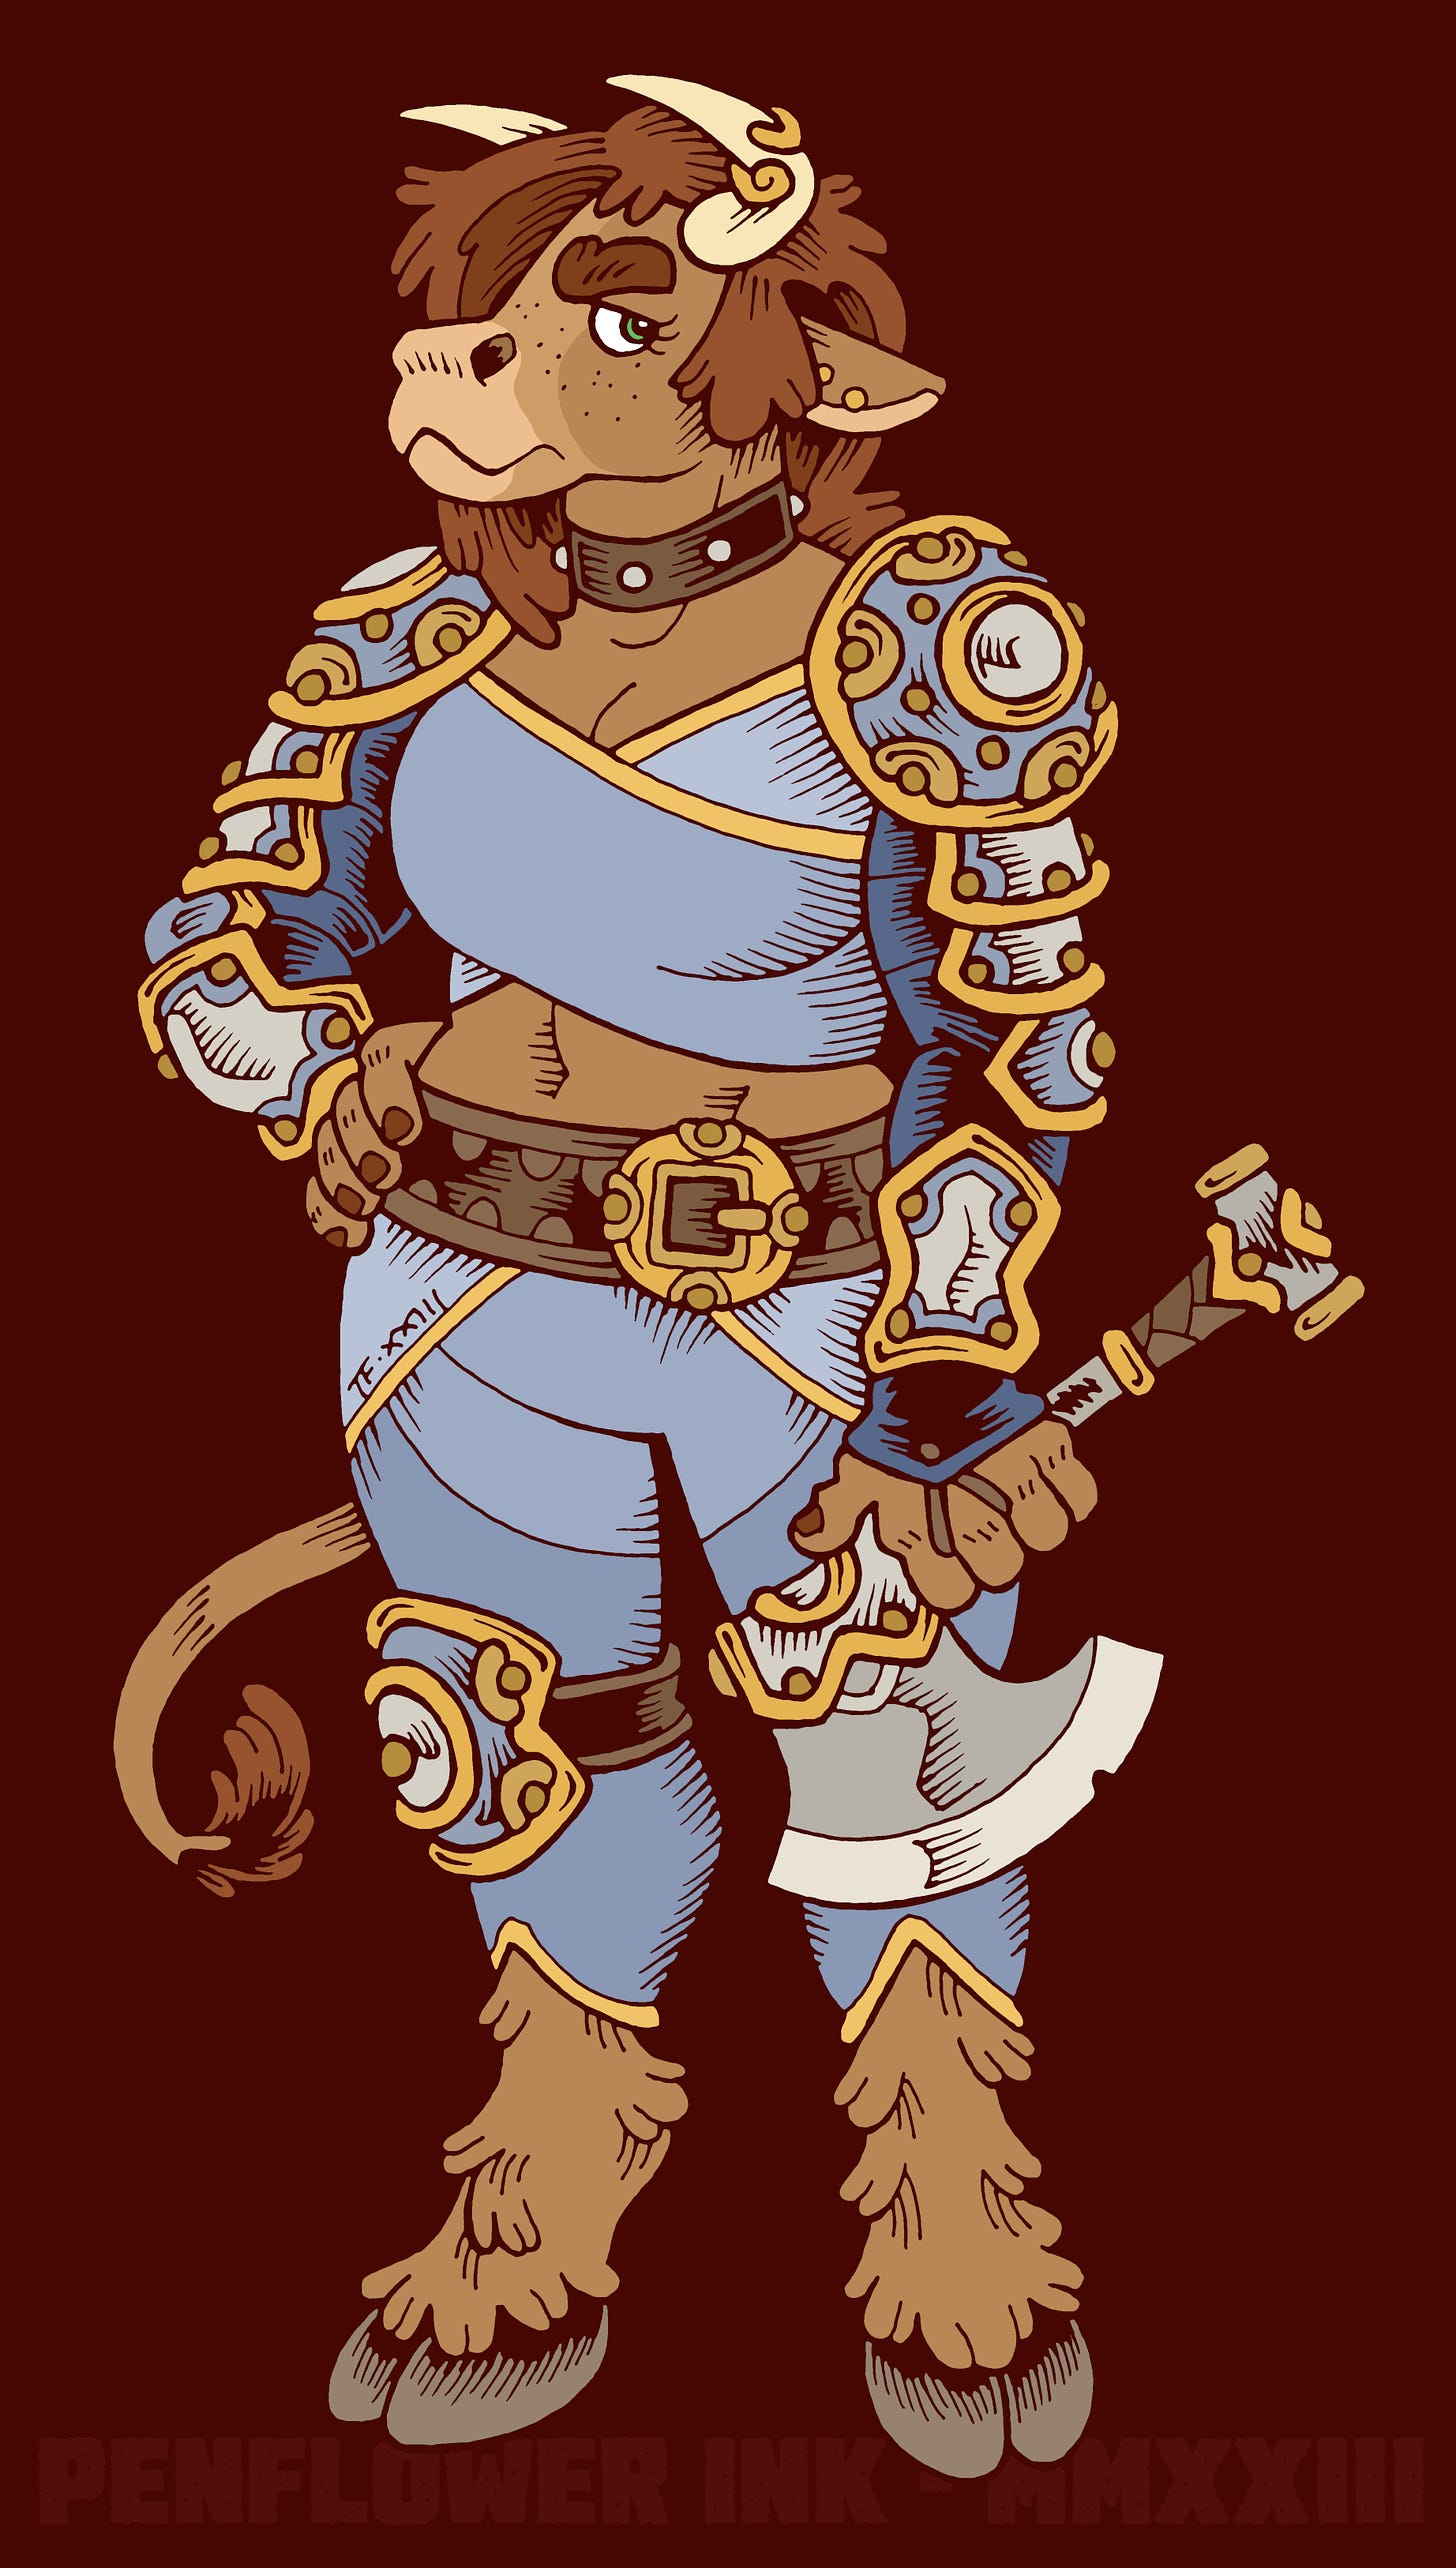 Traditionally hand-drawn and digitally coloured character illustration of a female minotaur. She has light brown fur and reddish brown messy hair. She is wearing gold ear-rings and jewellery on one of her horns. She is wearing a blue and gold suit of ceramonial armour, which mostly protects her arms, and is wielding a hand-axe. She has an exasperated look on her face.